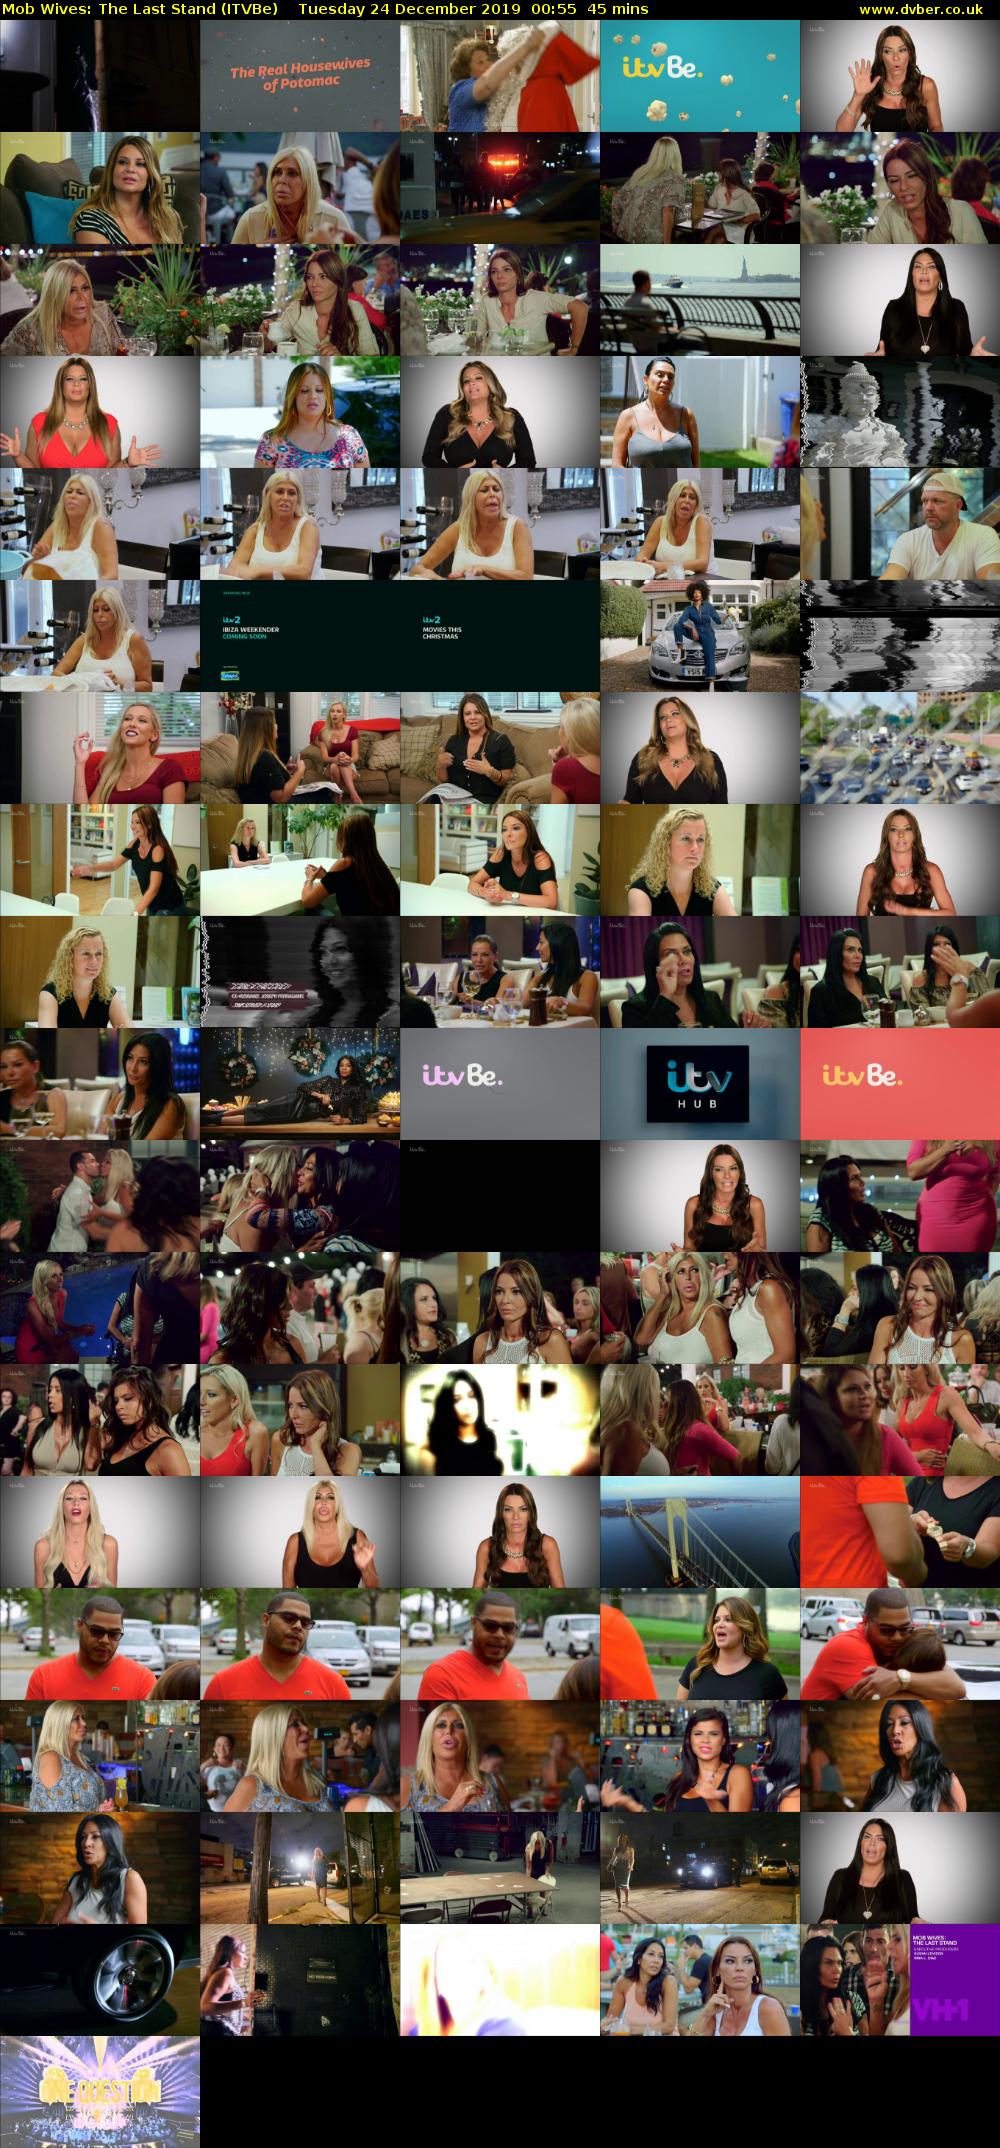 Mob Wives: The Last Stand (ITVBe) Tuesday 24 December 2019 00:55 - 01:40